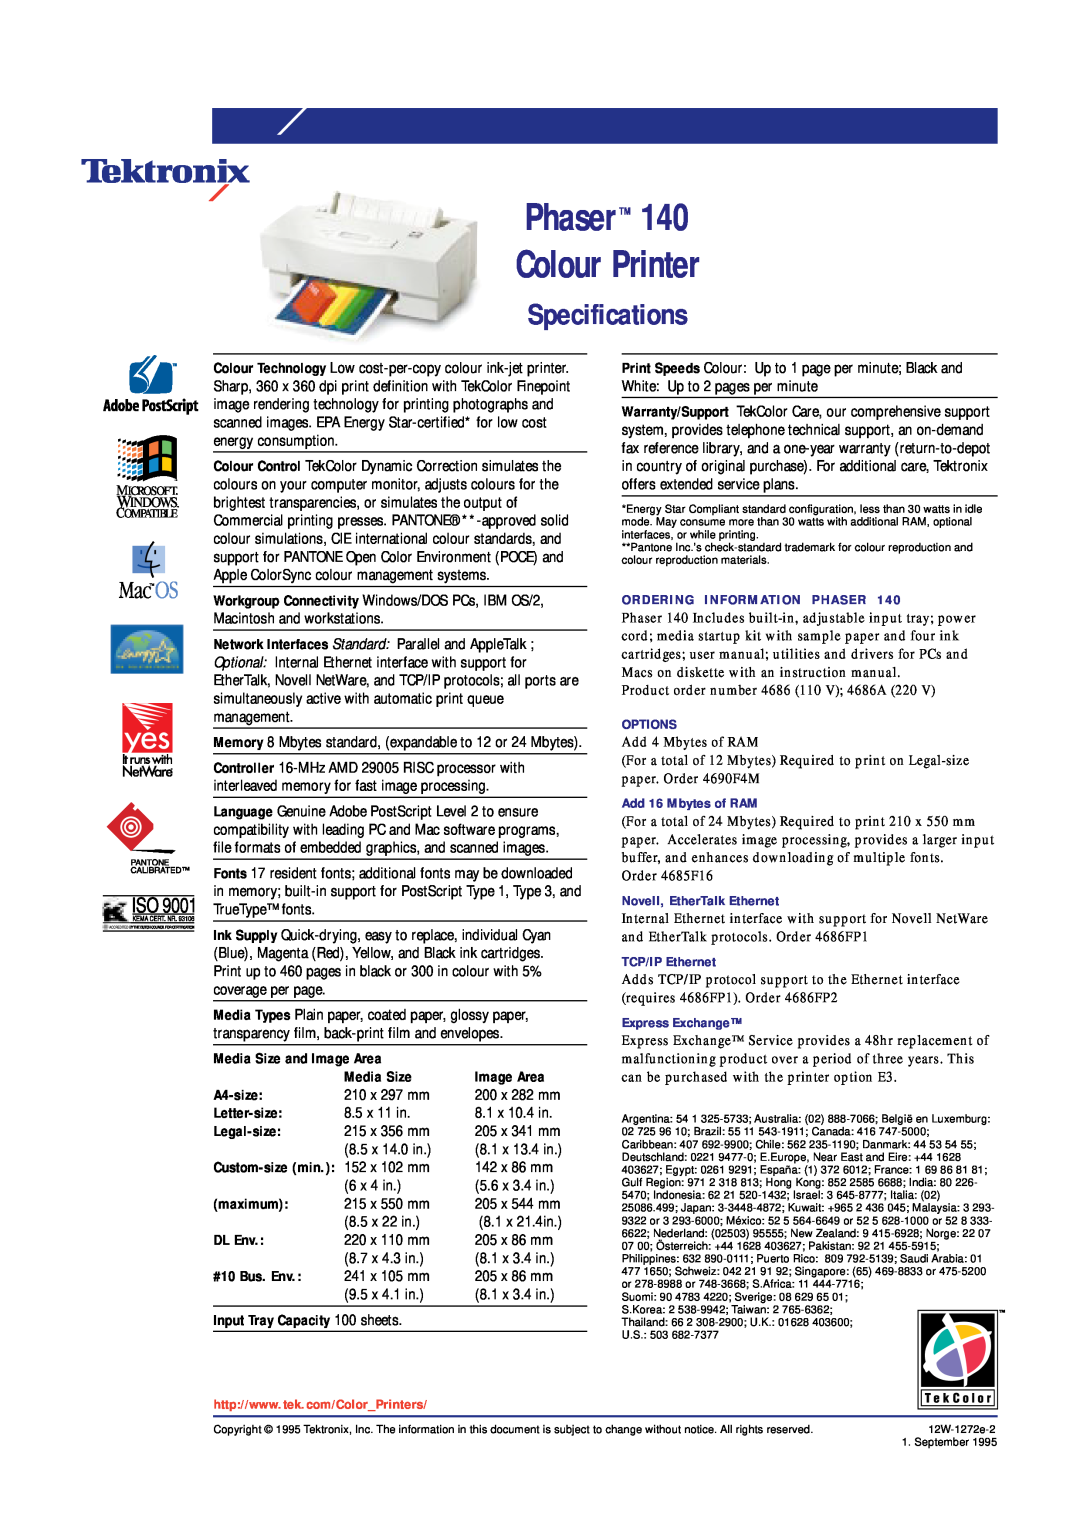 Xerox specifications Specifications, Phaser 140 Colour Printer 